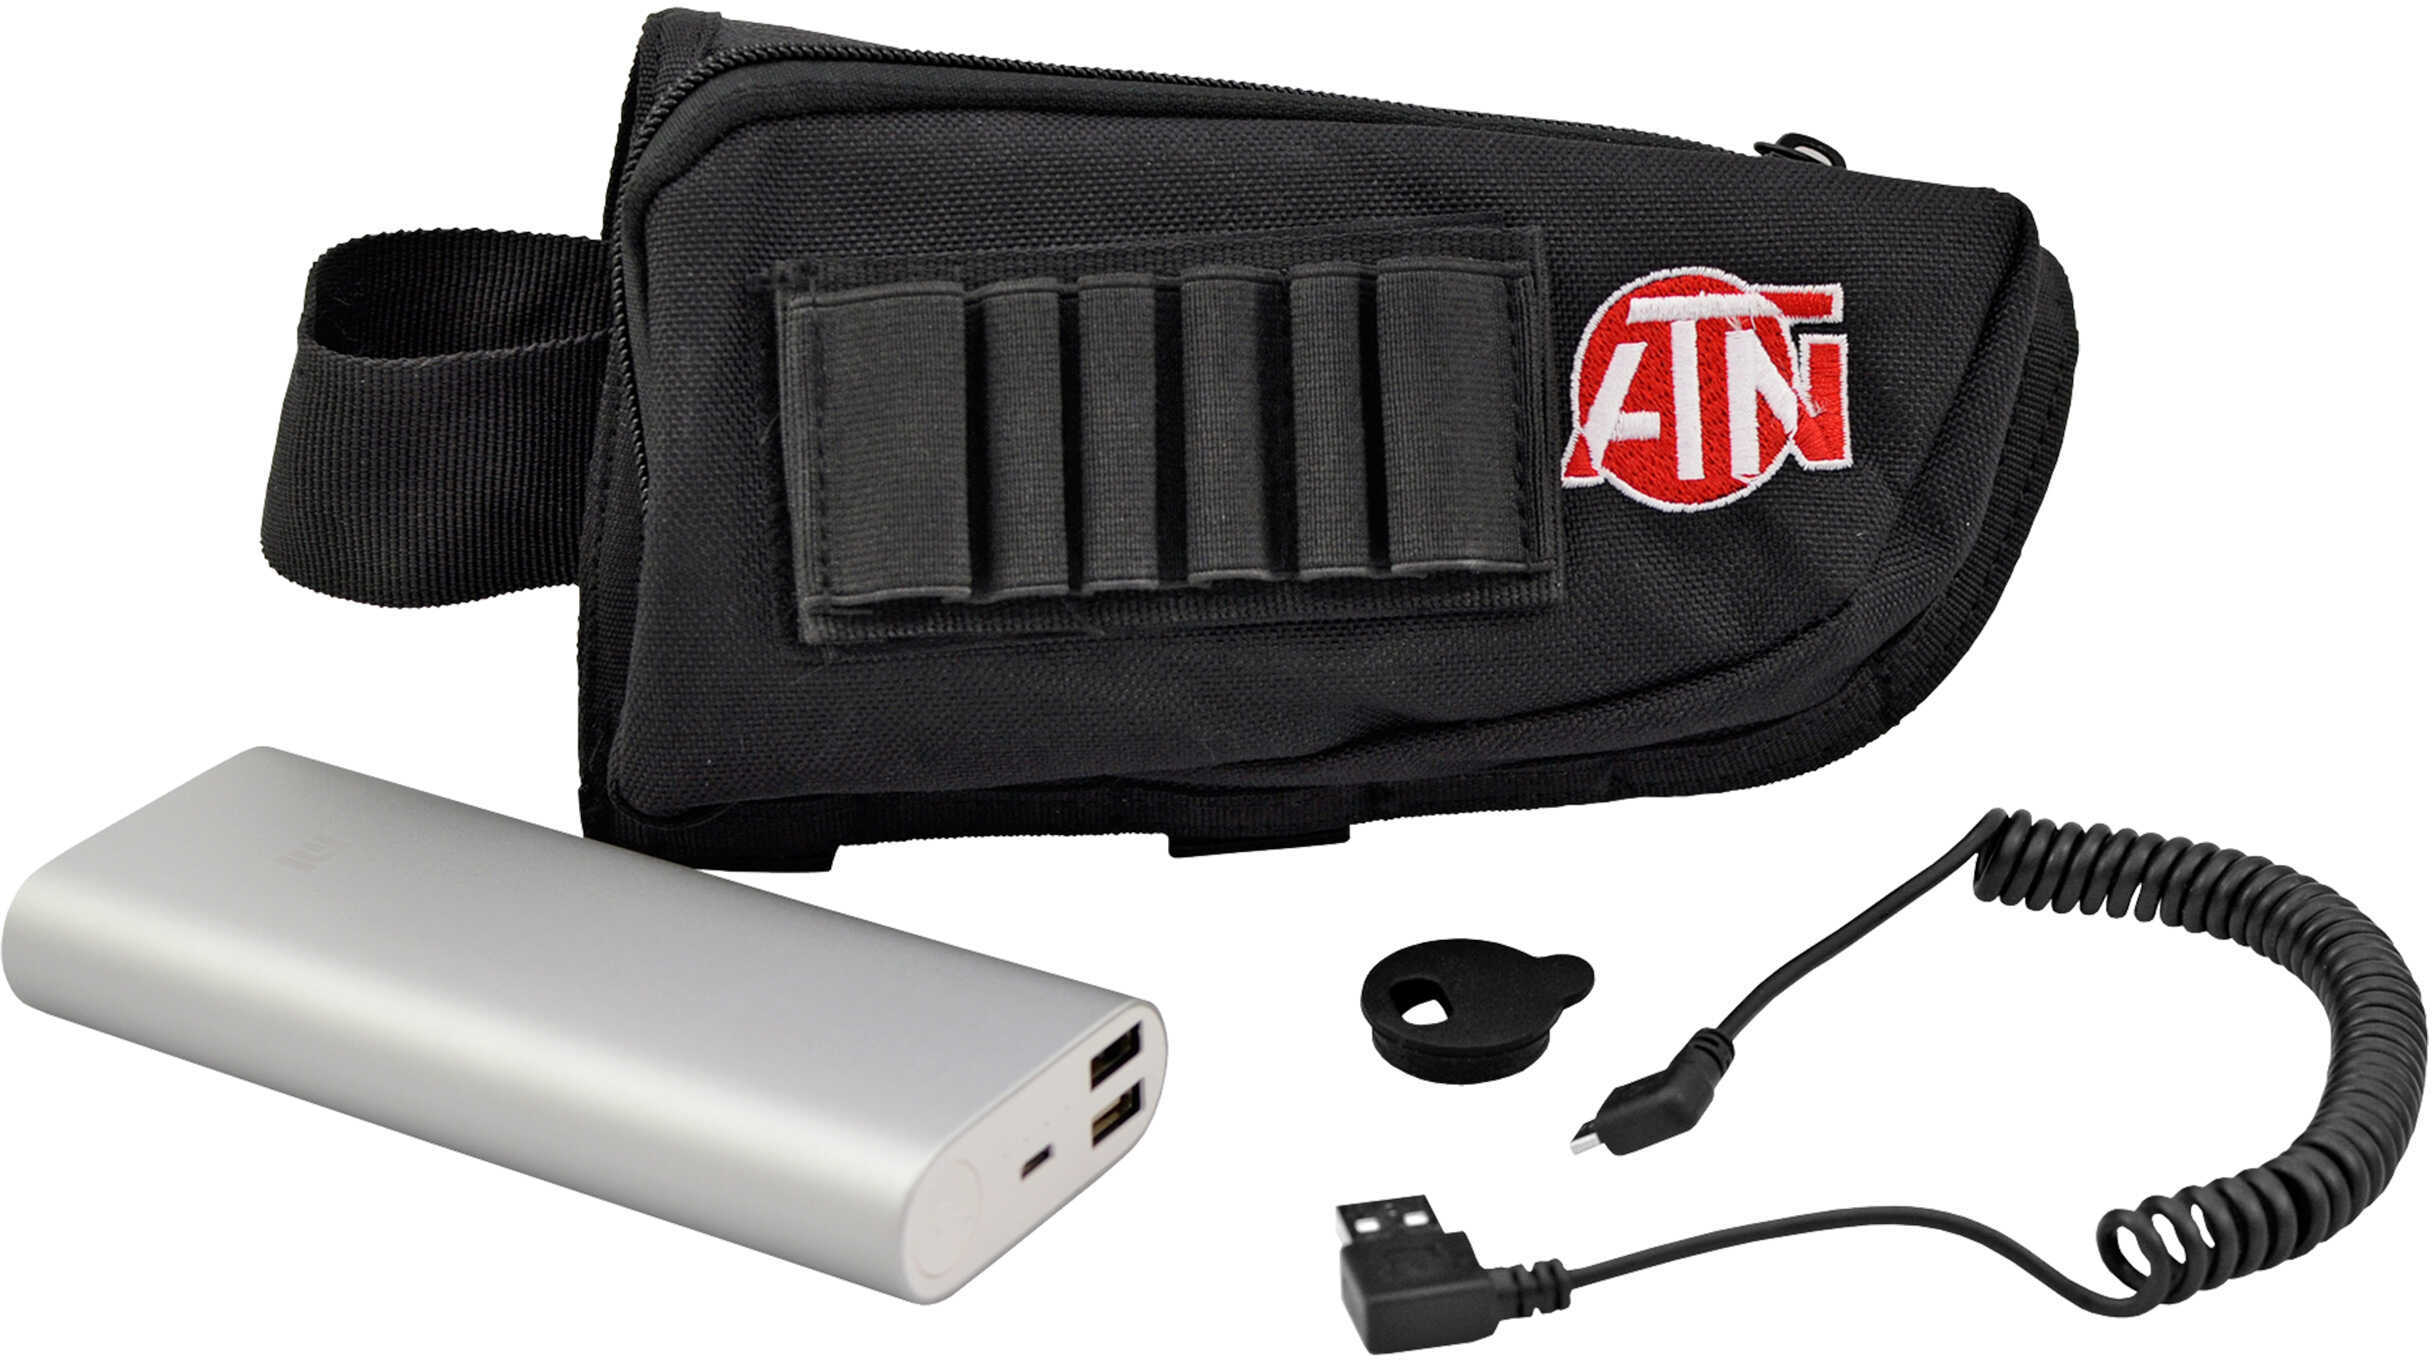 ATN Extended Life Bat Pack W/ Micro USB Cable